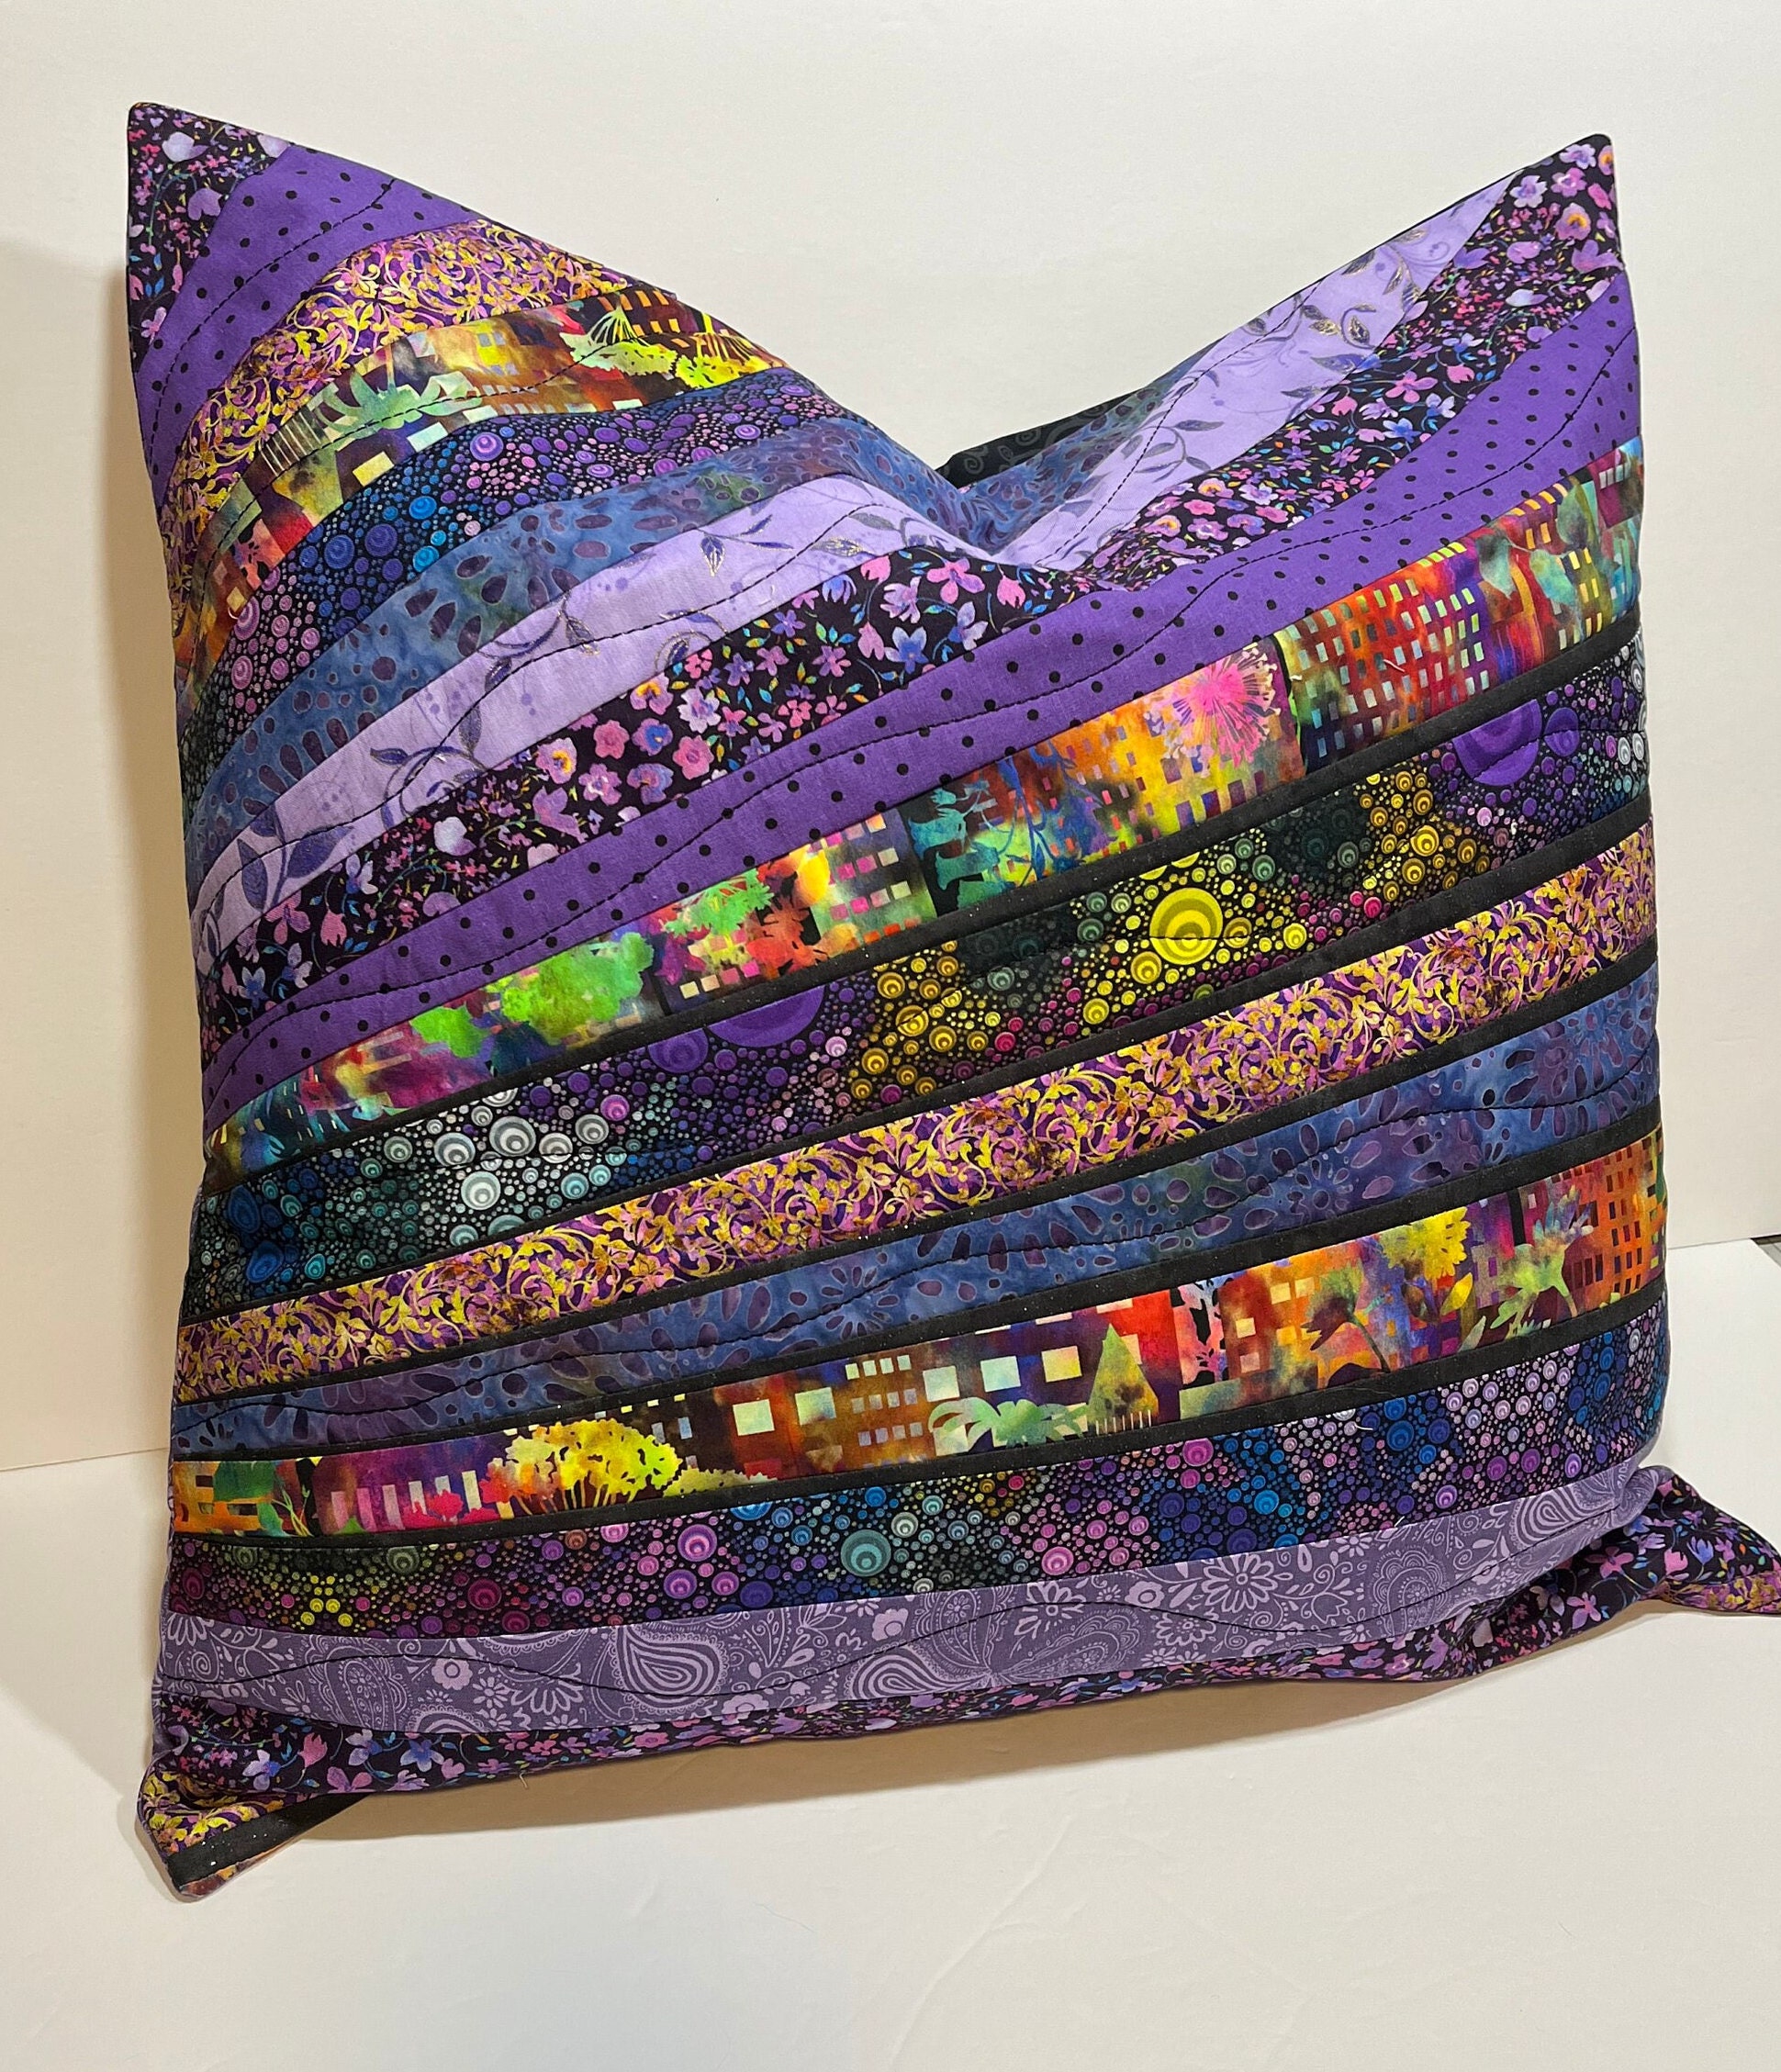 Giant Floor Pillows – Poole Party of 5